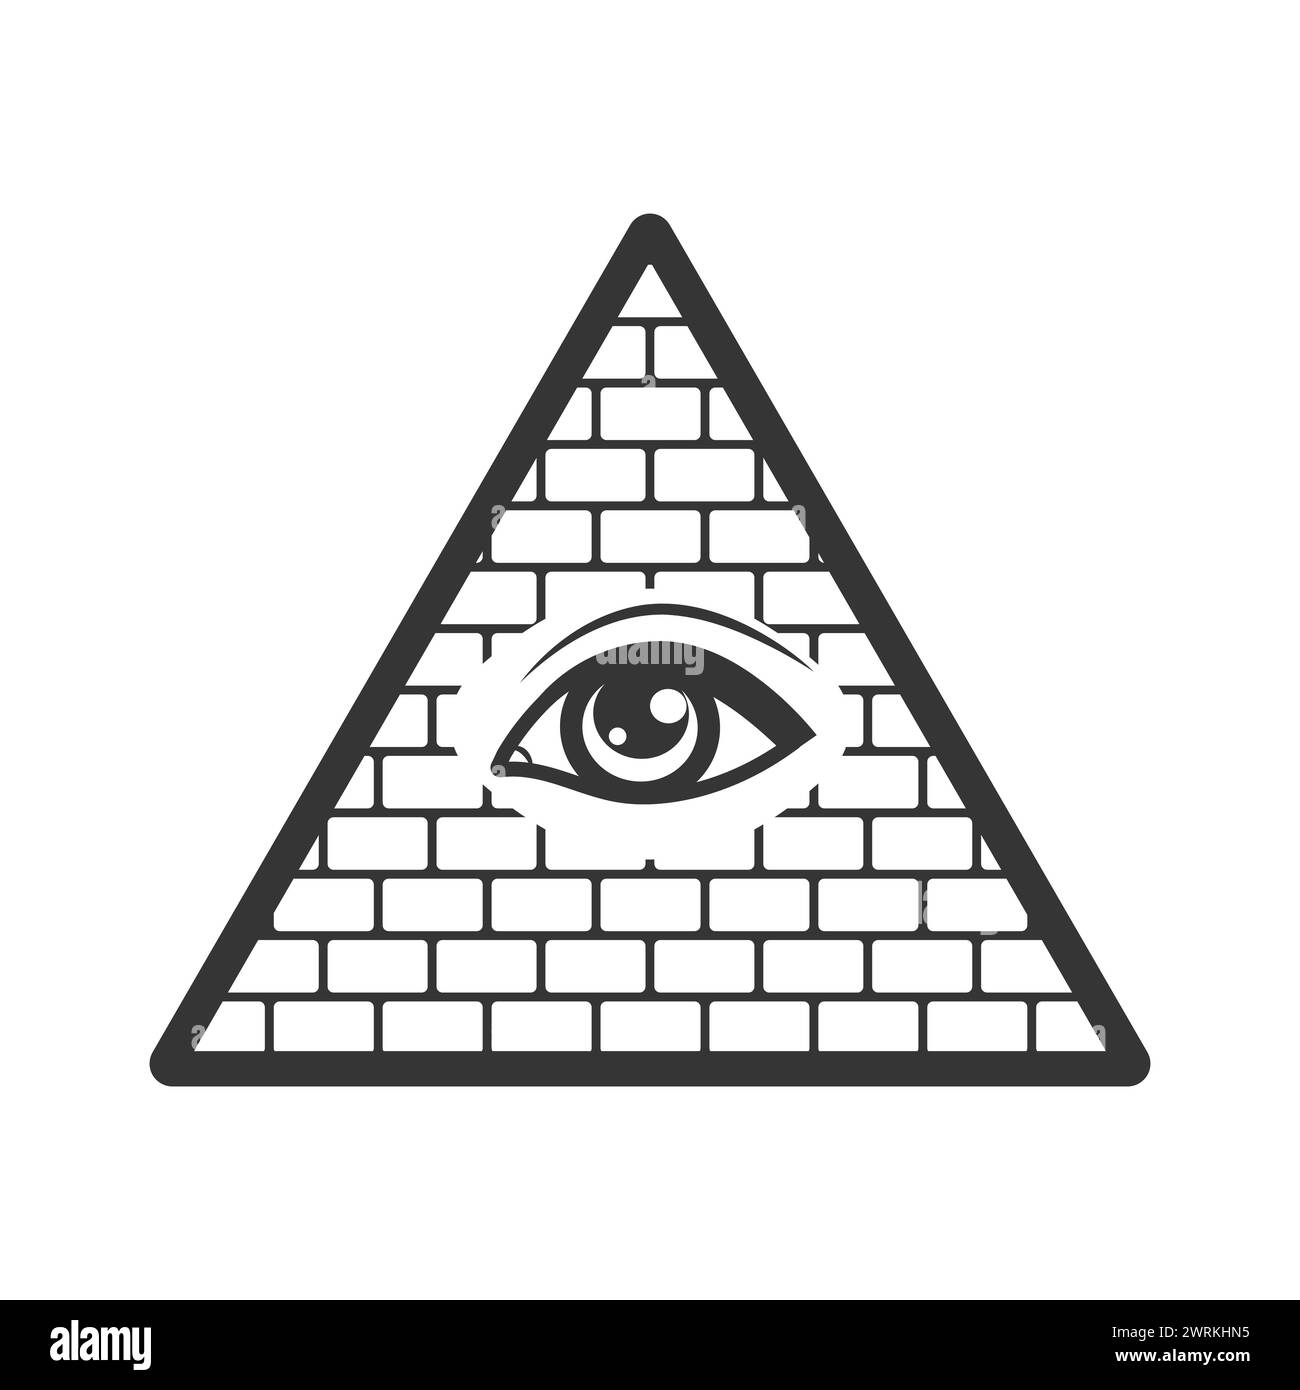 All-seeing eye on pyramid of freemasons symbols of occultism, illuminati secret society, Vector elements isolated on white Stock Vector